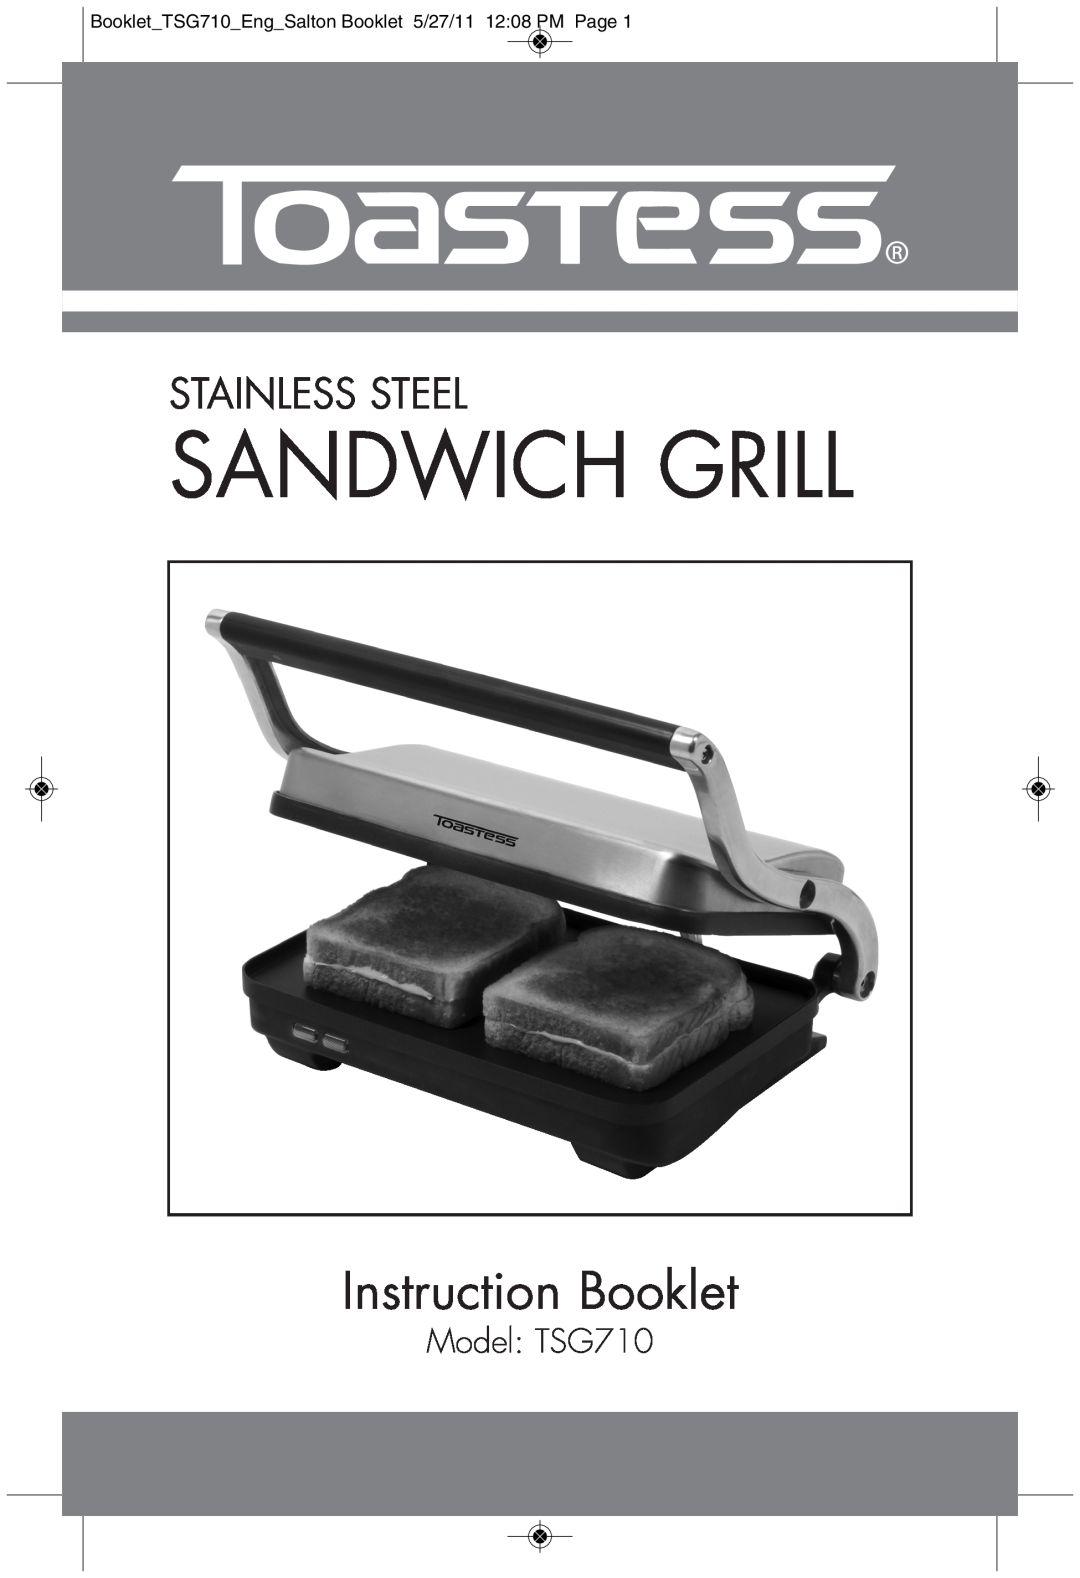 Toastess manual Model TSG710, Sandwich Grill, Instruction Booklet, Stainless Steel 